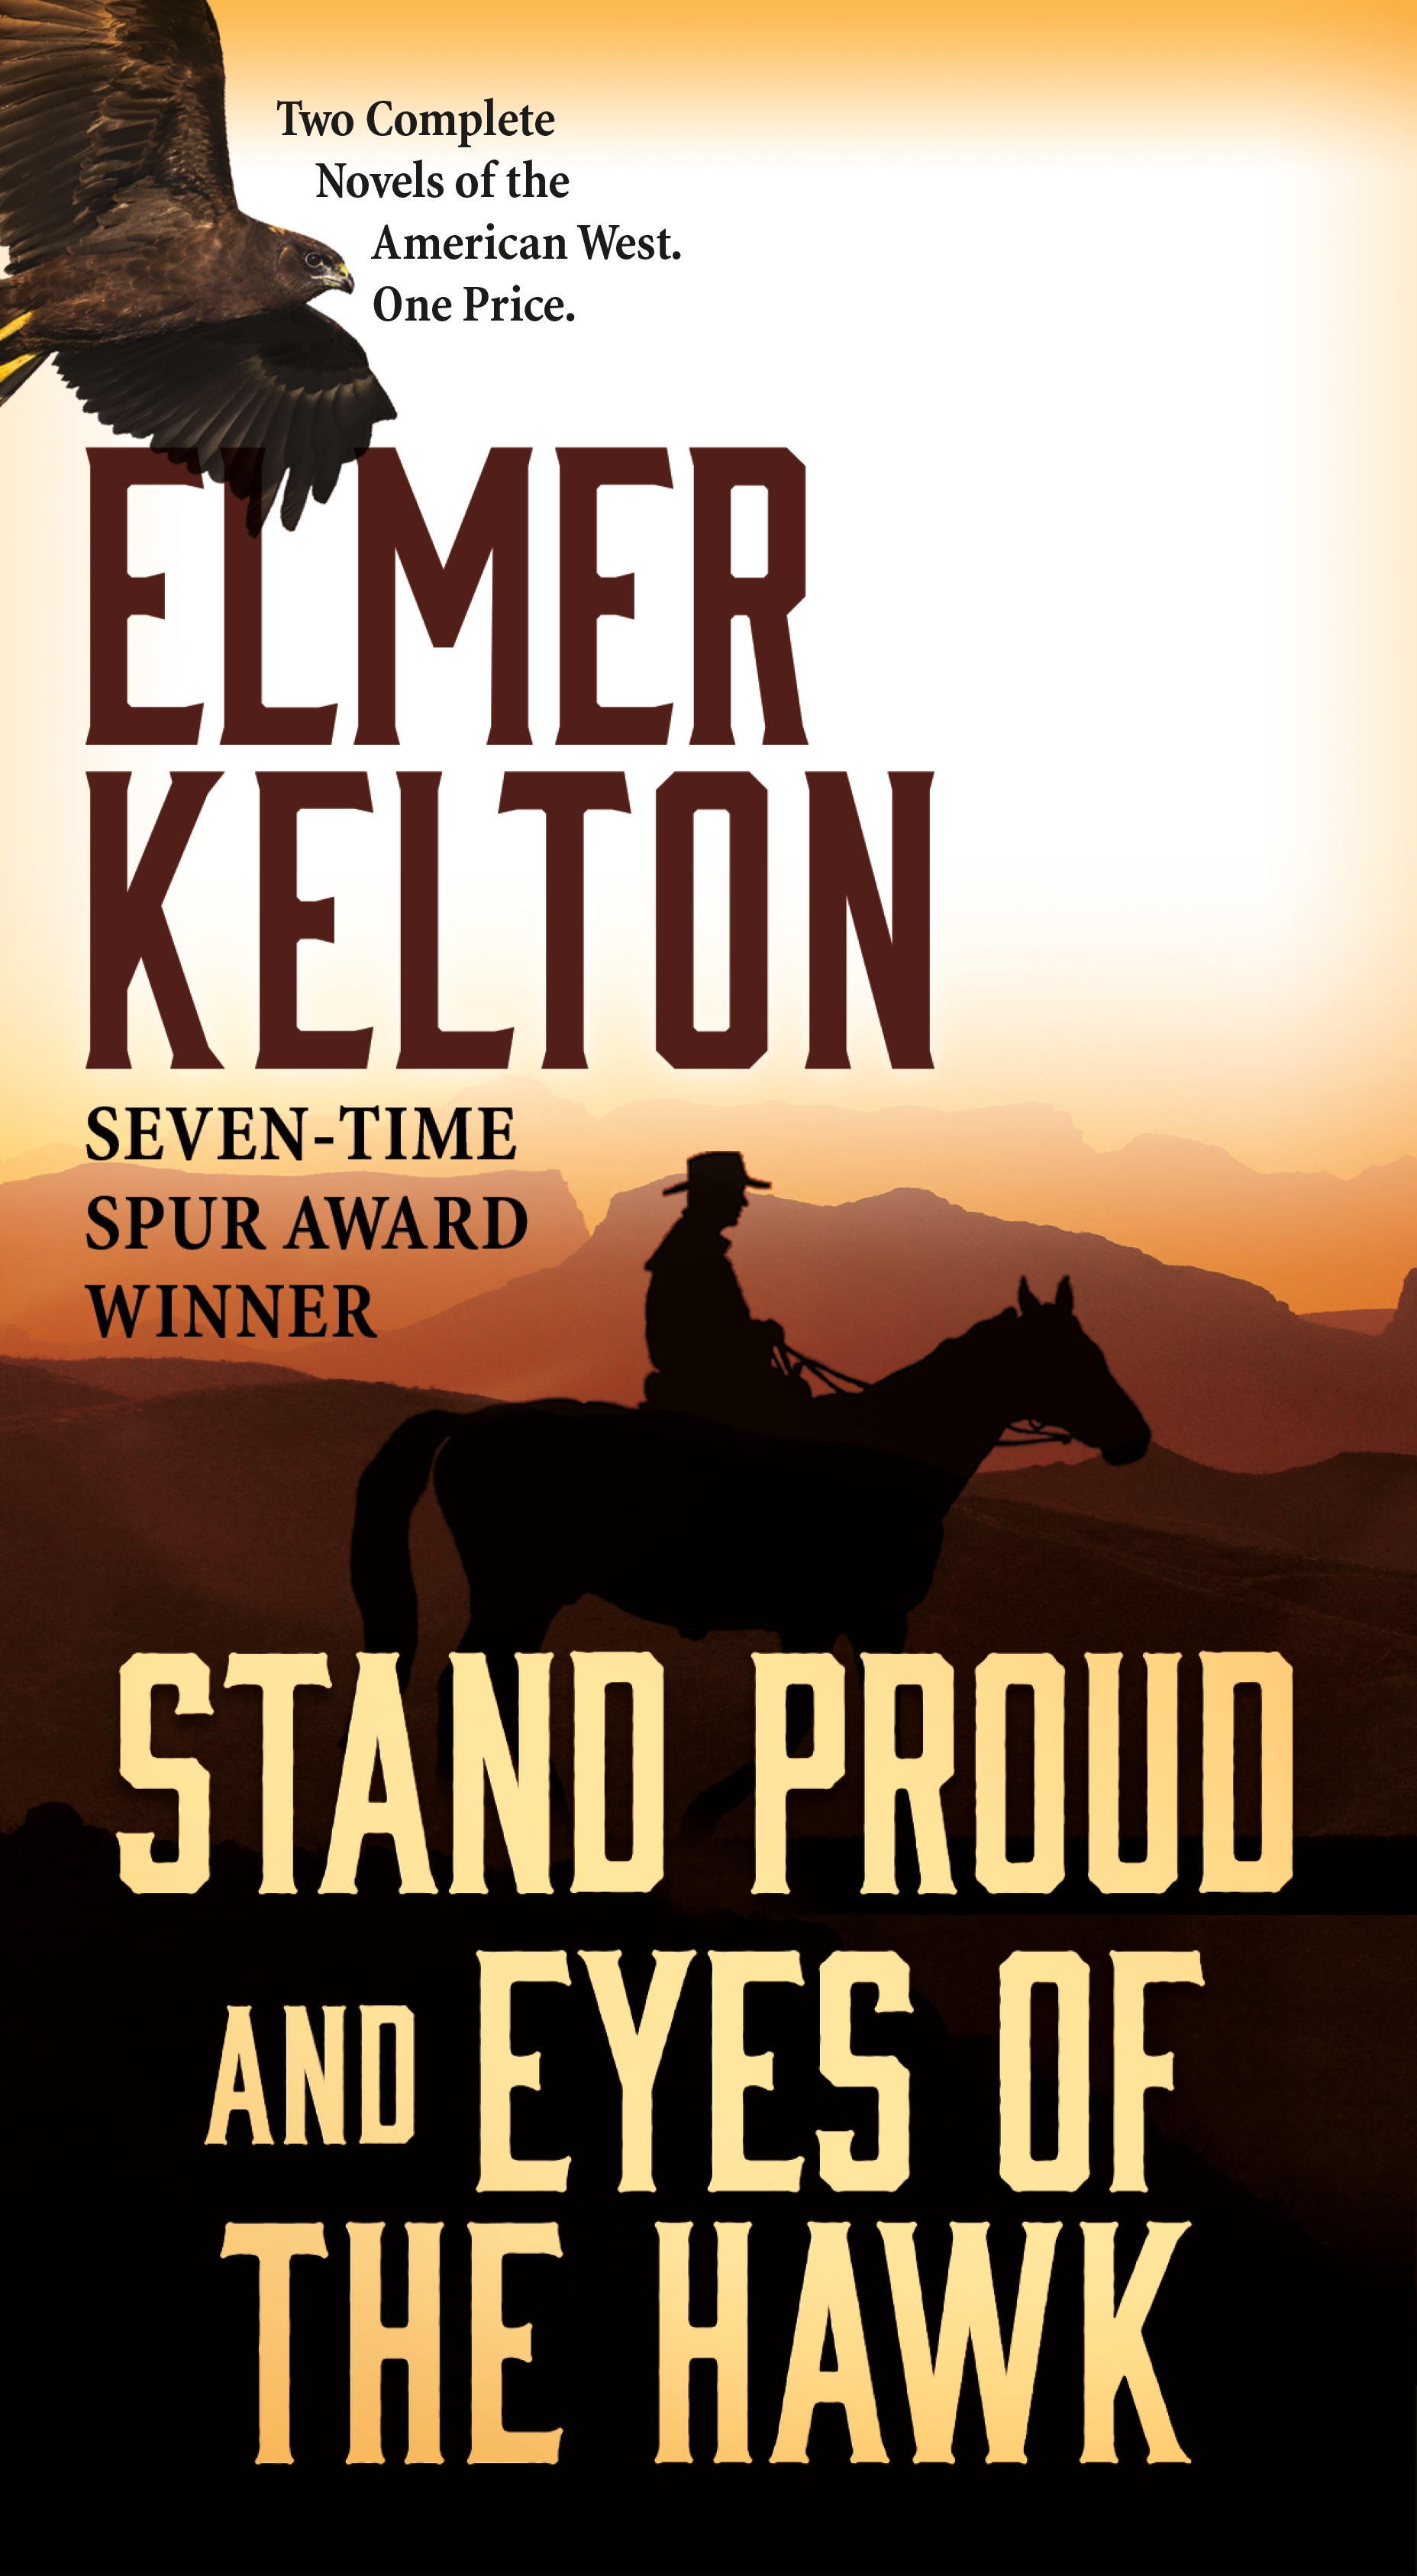 Stand Proud and Eyes of the Hawk : Two Complete Novels of the American West by Elmer Kelton